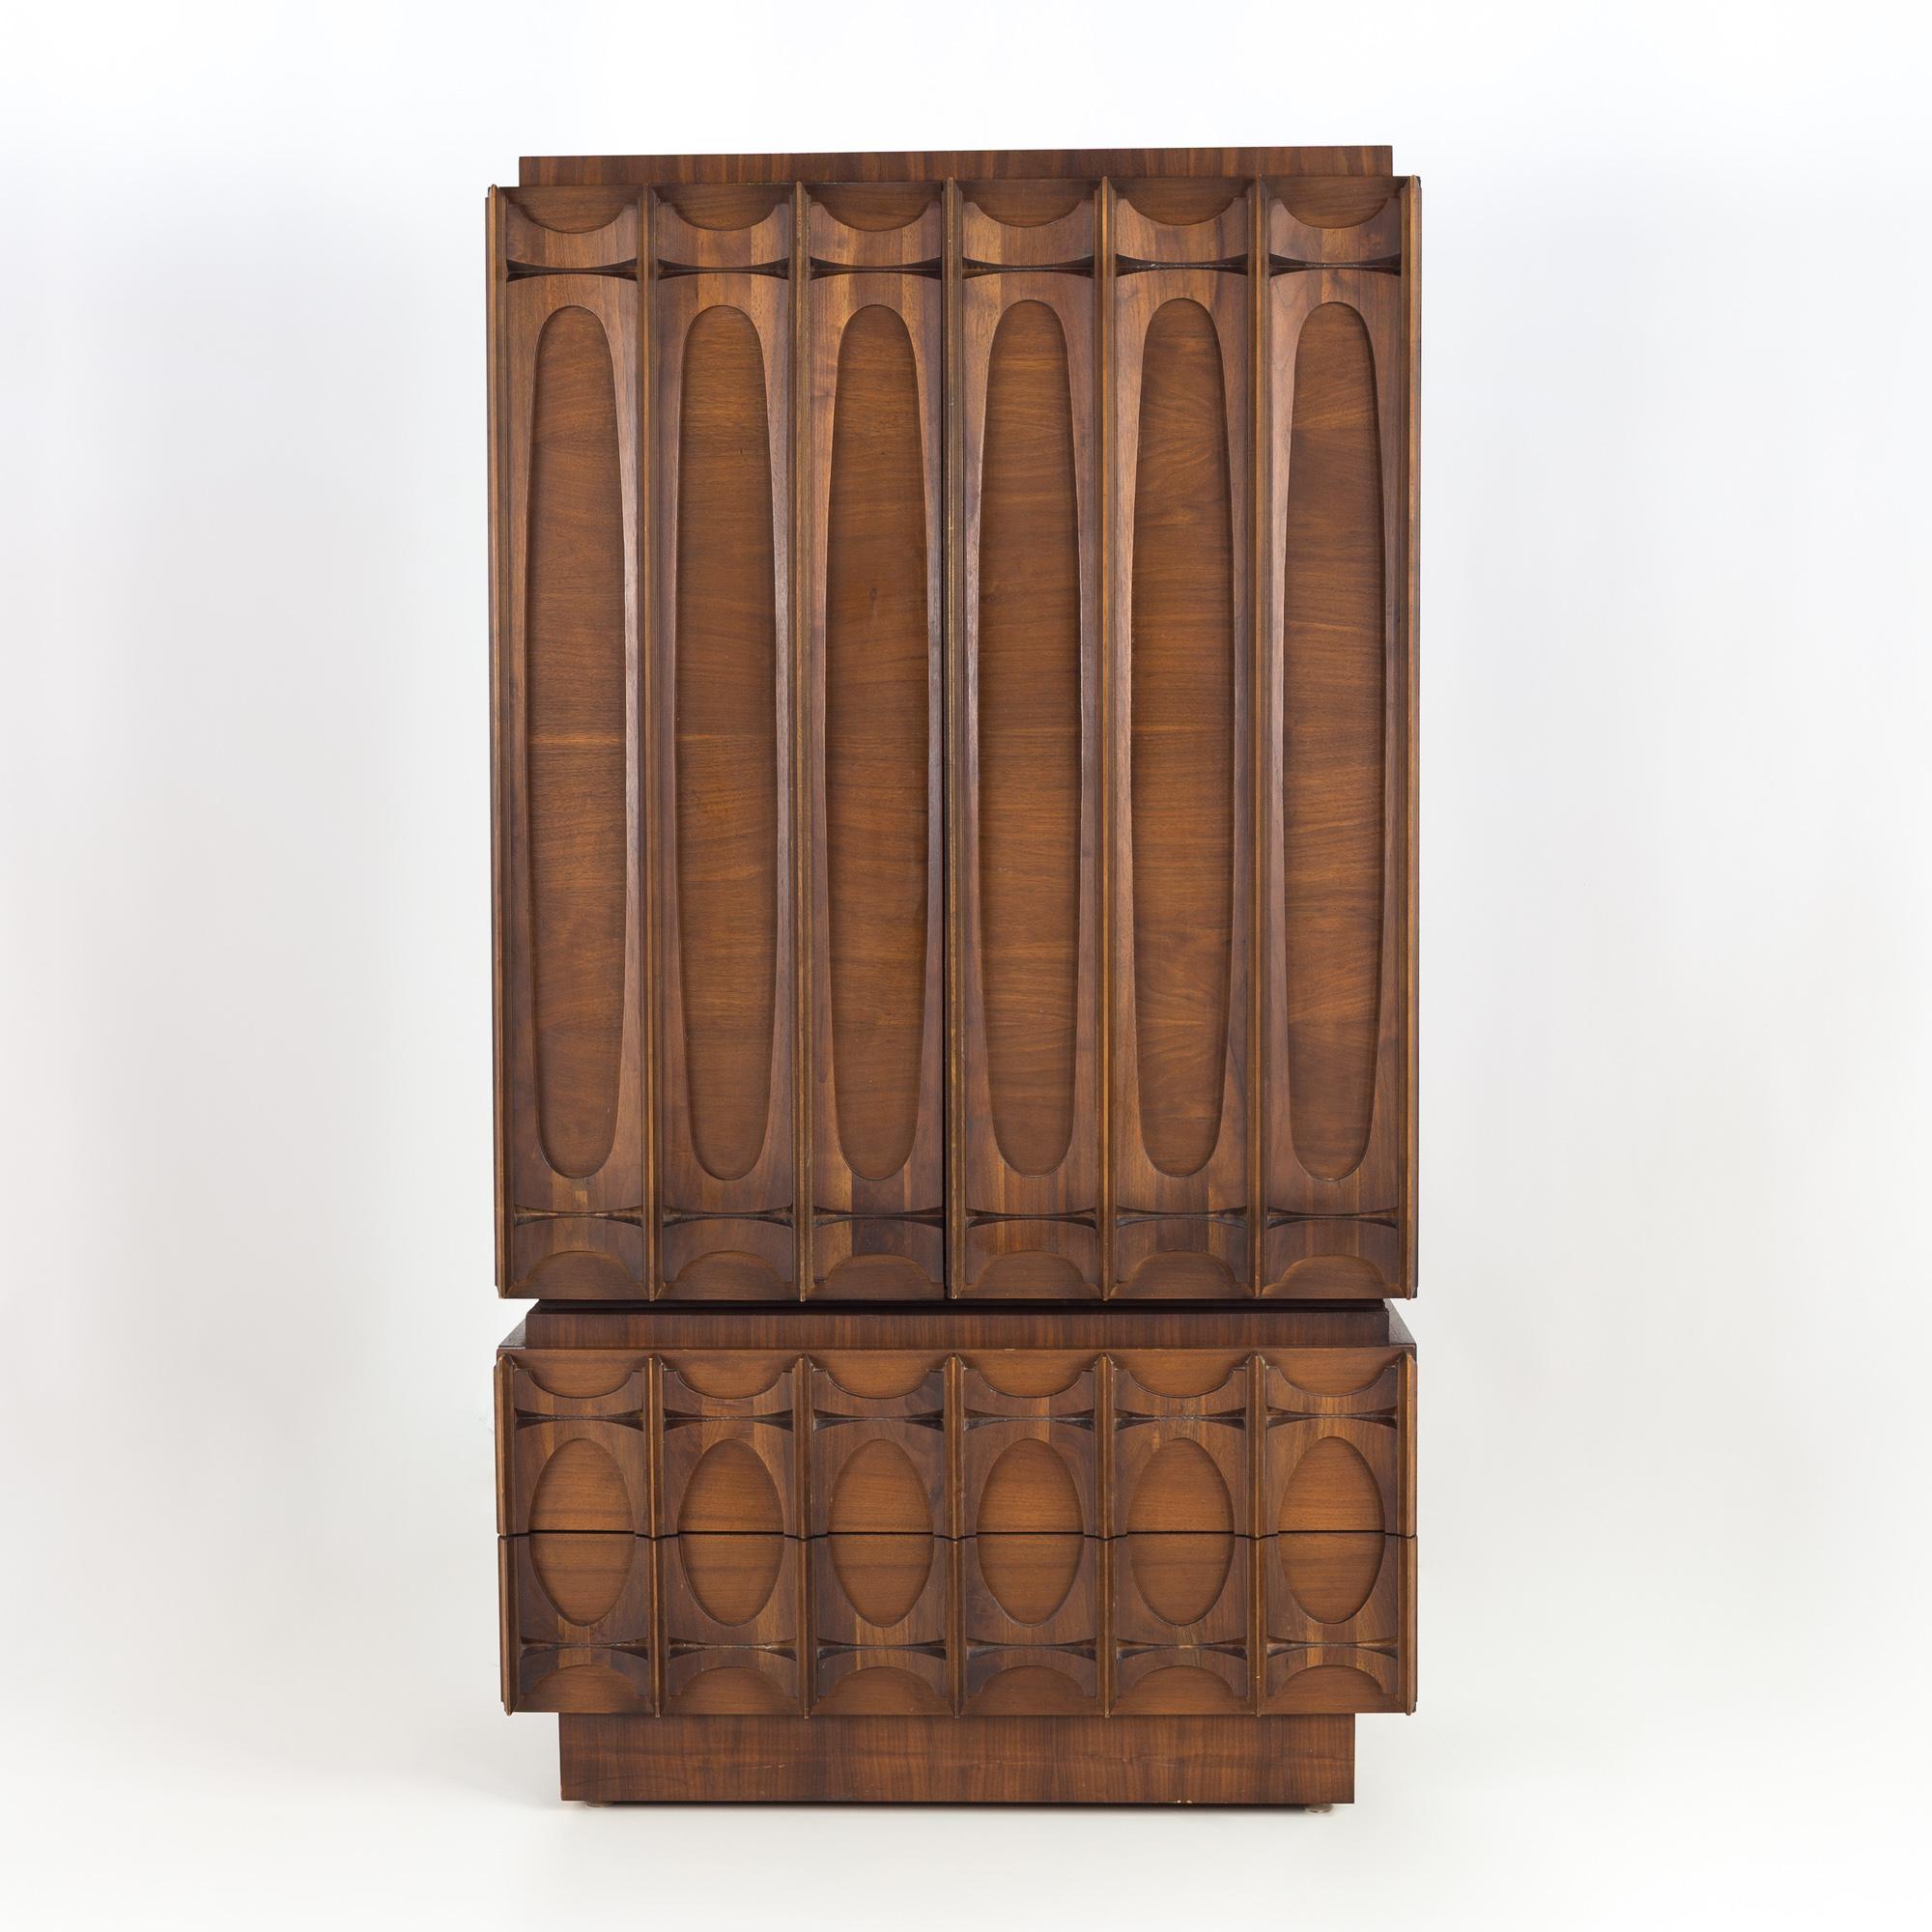 Canadian Brutalist 2 piece Gentlemen's chest armoire highboy dresser

This chest measures 40 wide x 21.5 deep x 73 inches high

All pieces of furniture can be had in what we call restored vintage condition. That means the piece is restored upon